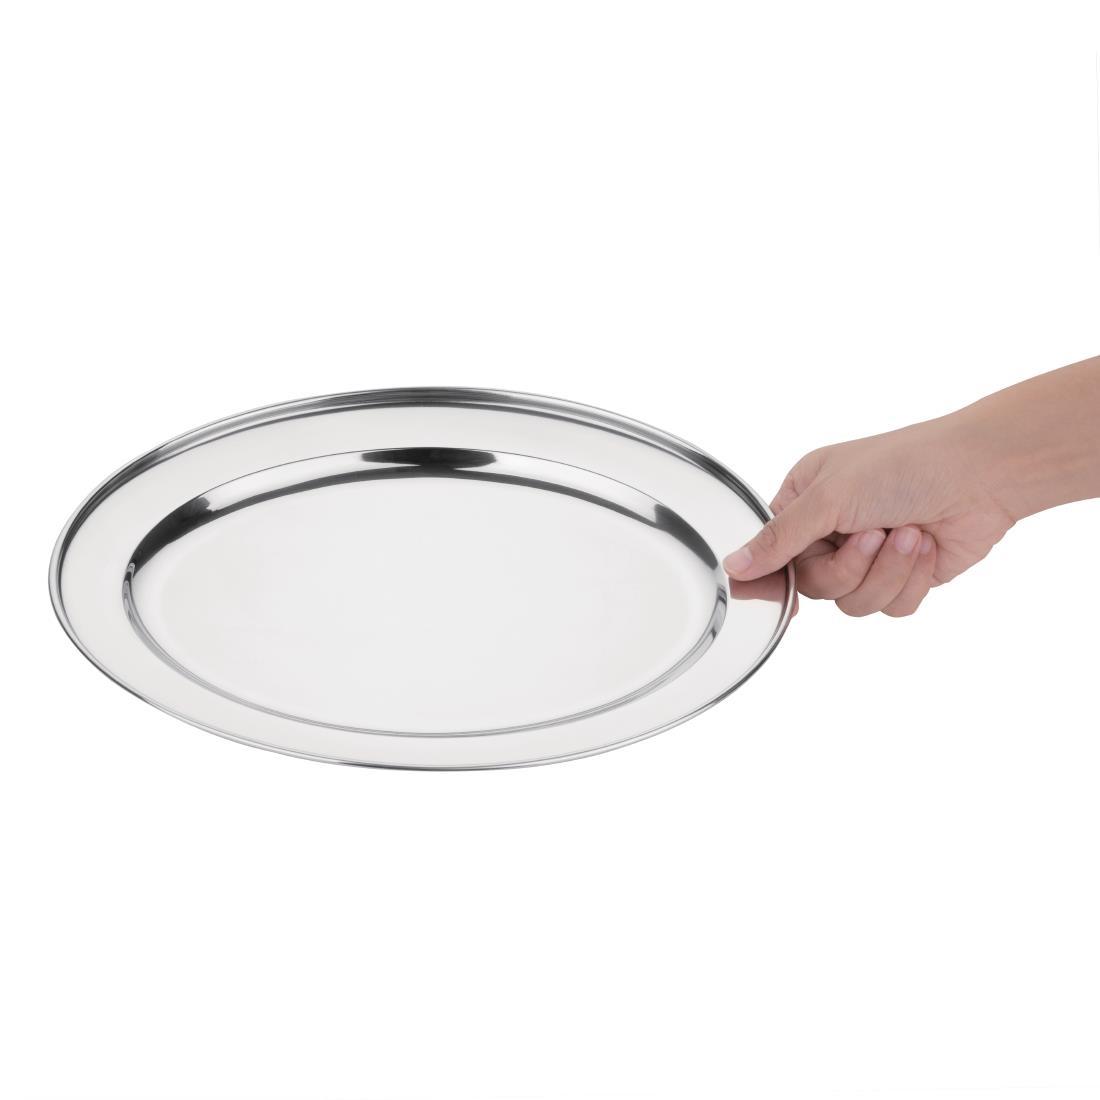 Olympia Stainless Steel Oval Serving Tray 350mm - K364  - 7